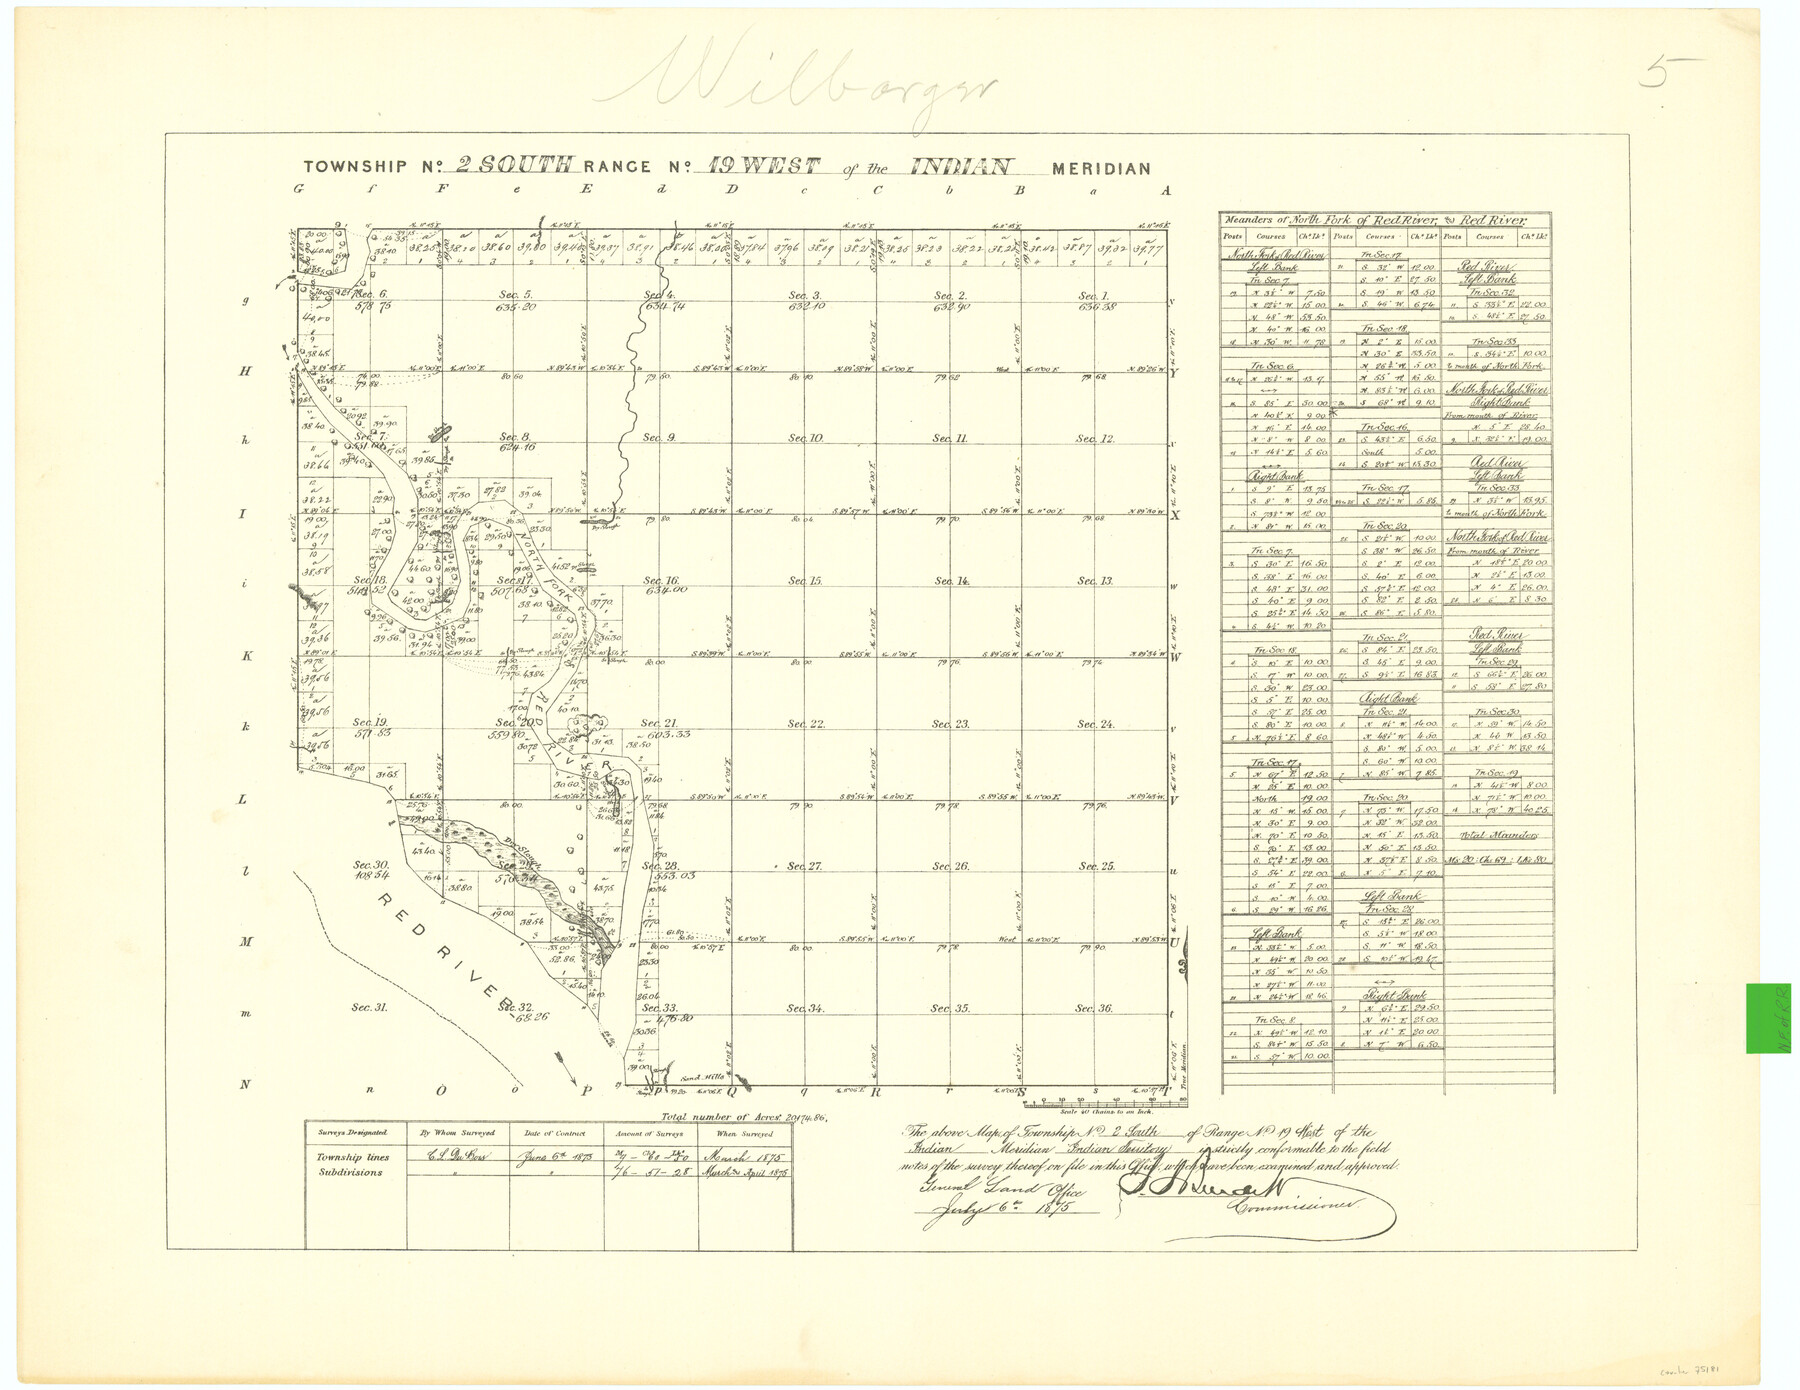 75181, Township No. 2 South Range No. 19 West of the Indian Meridian, General Map Collection